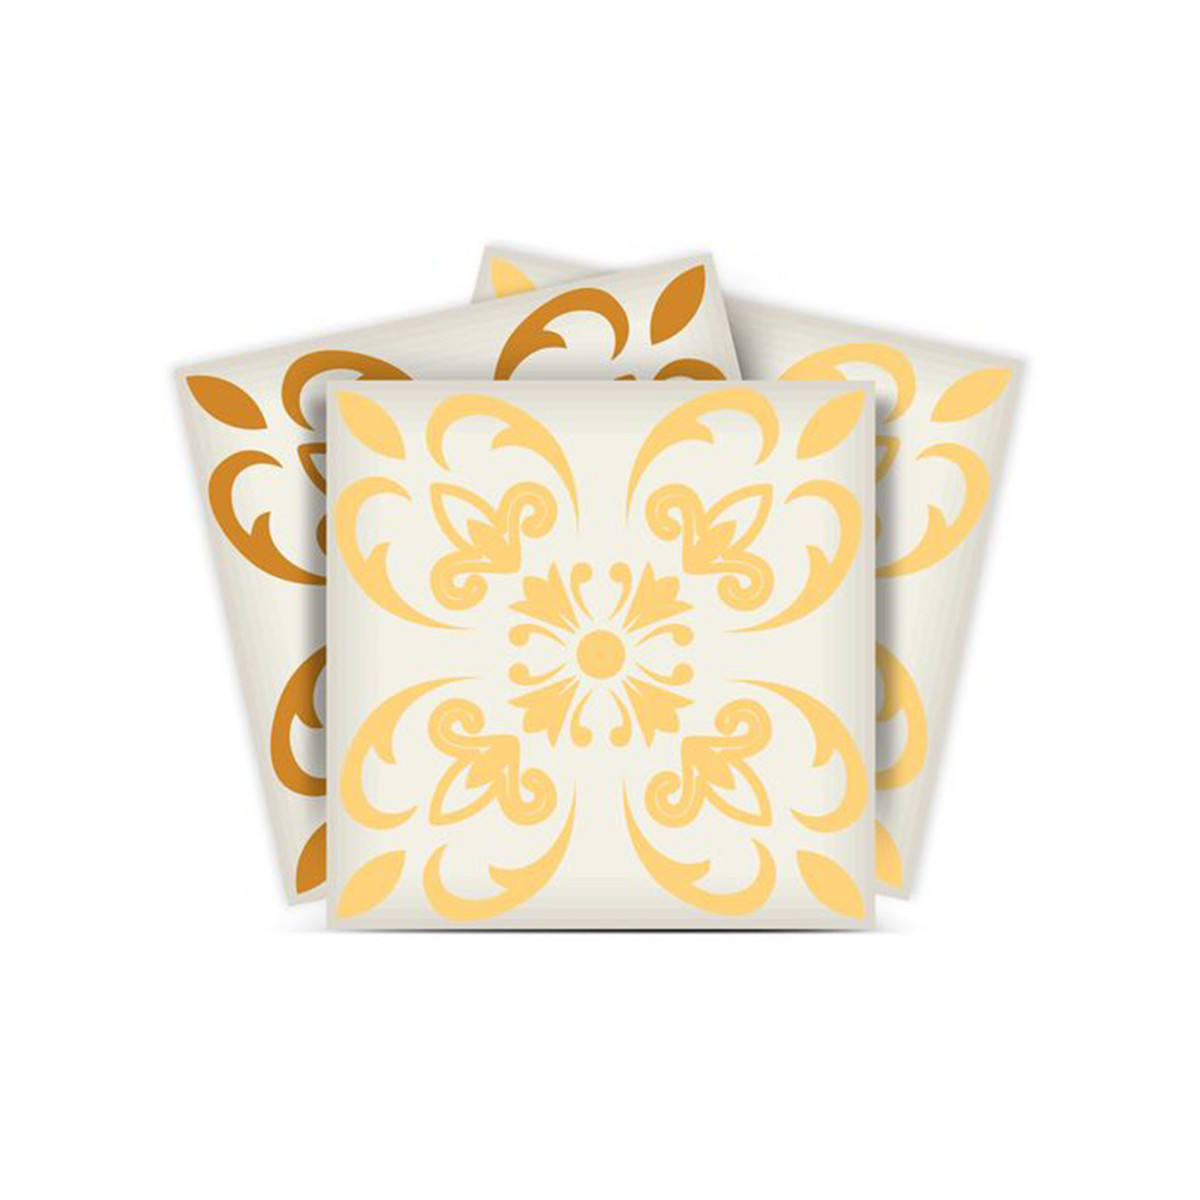 7" X 7" Golden Yellow Retro Peel And Stick Removable Tiles-399843-1